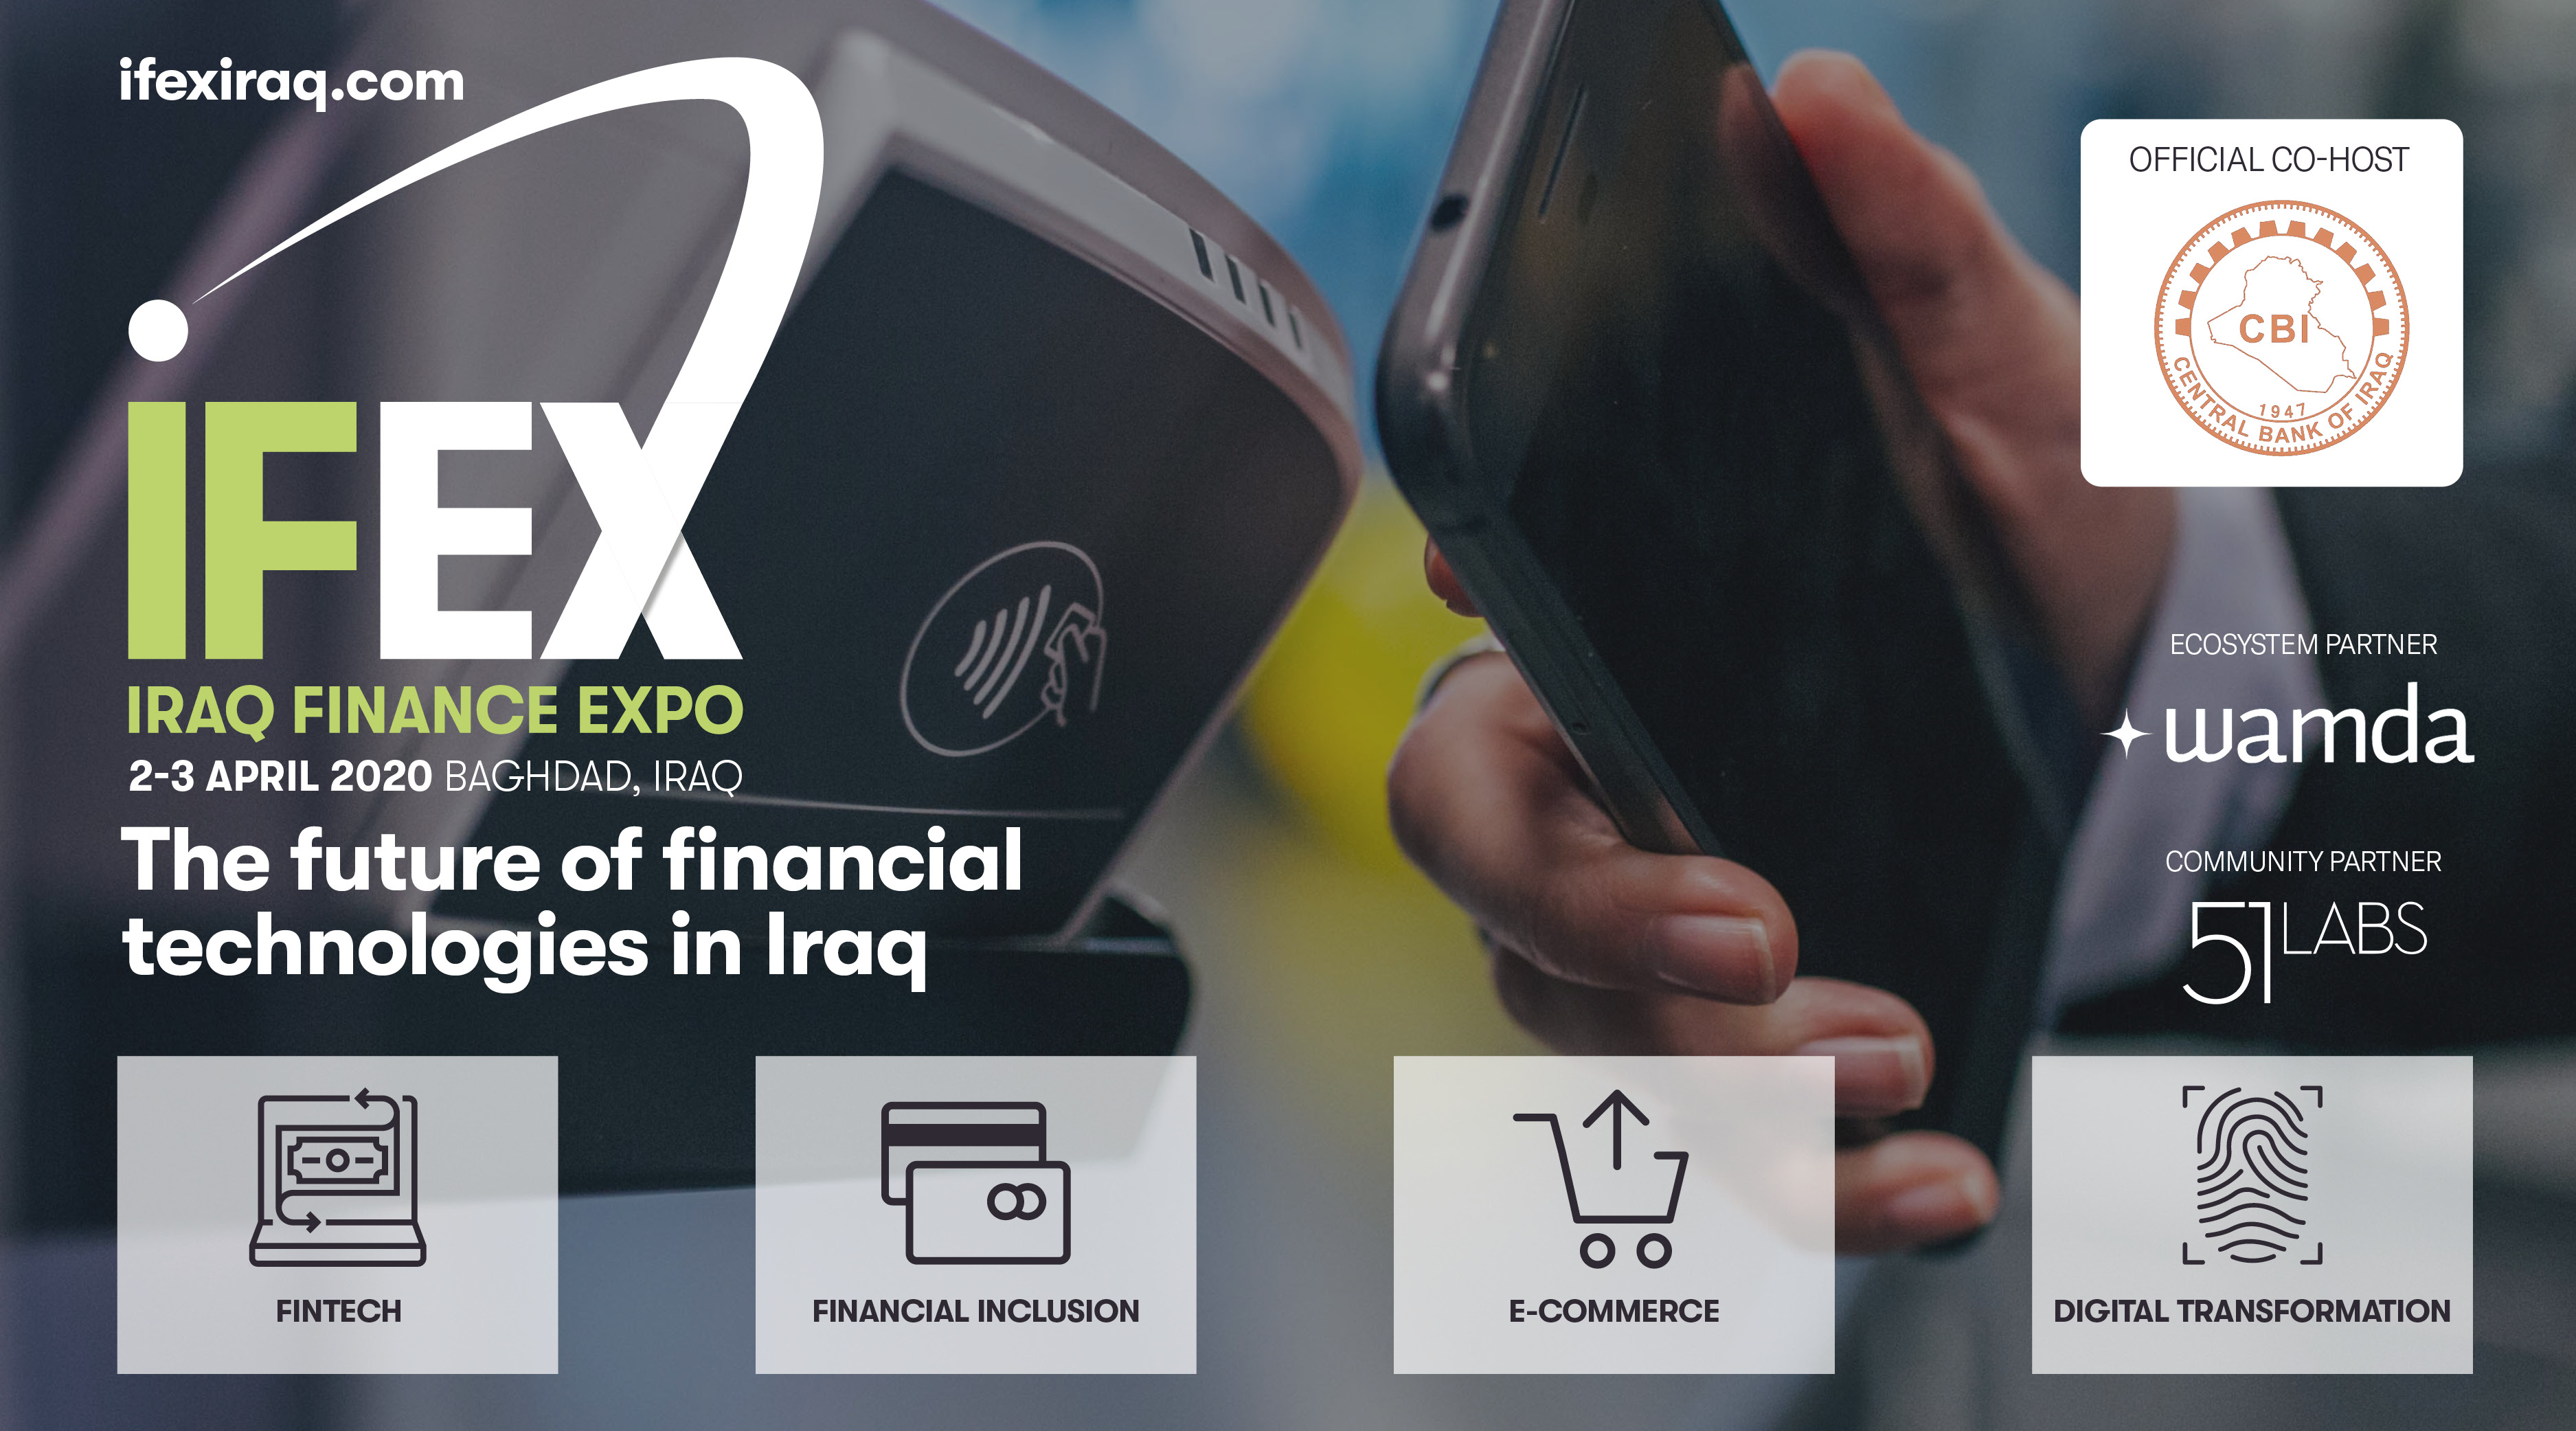 Iraq Finance Expo 2020 organized by Frontier Exchange